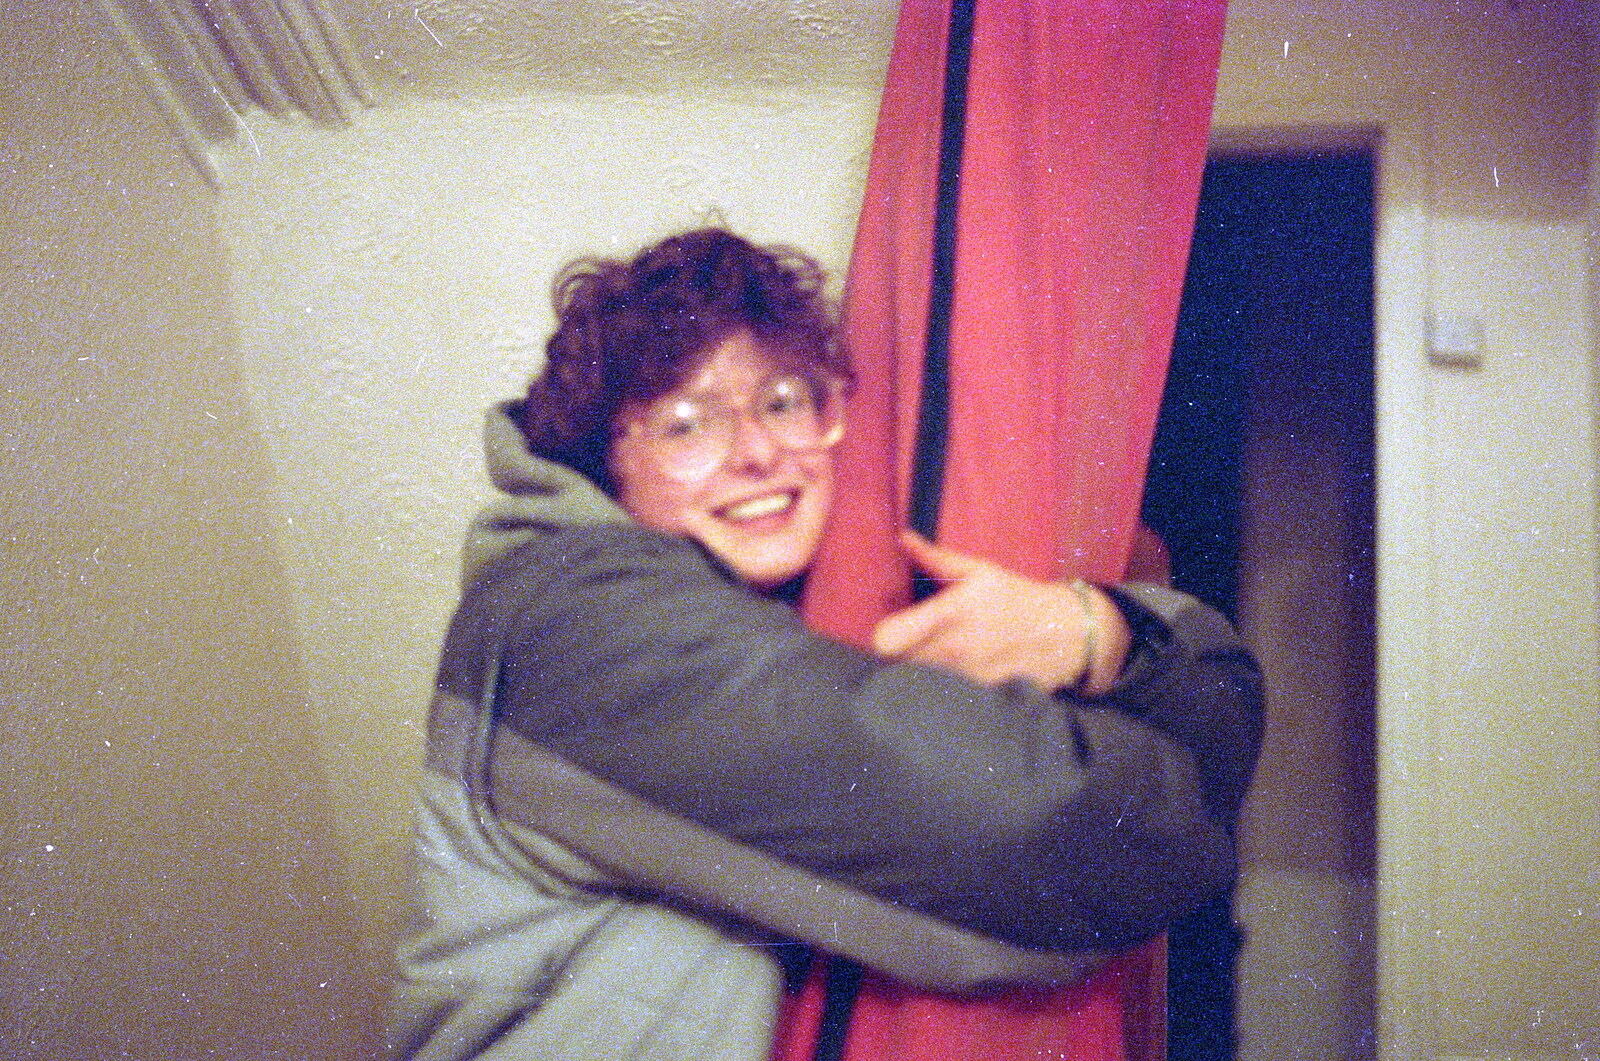 Barbara with James's hang-glider from Uni: First Weeks At Polytechnic, Umbrellas and a Visit From Liz, Plymouth - 26th September 1985